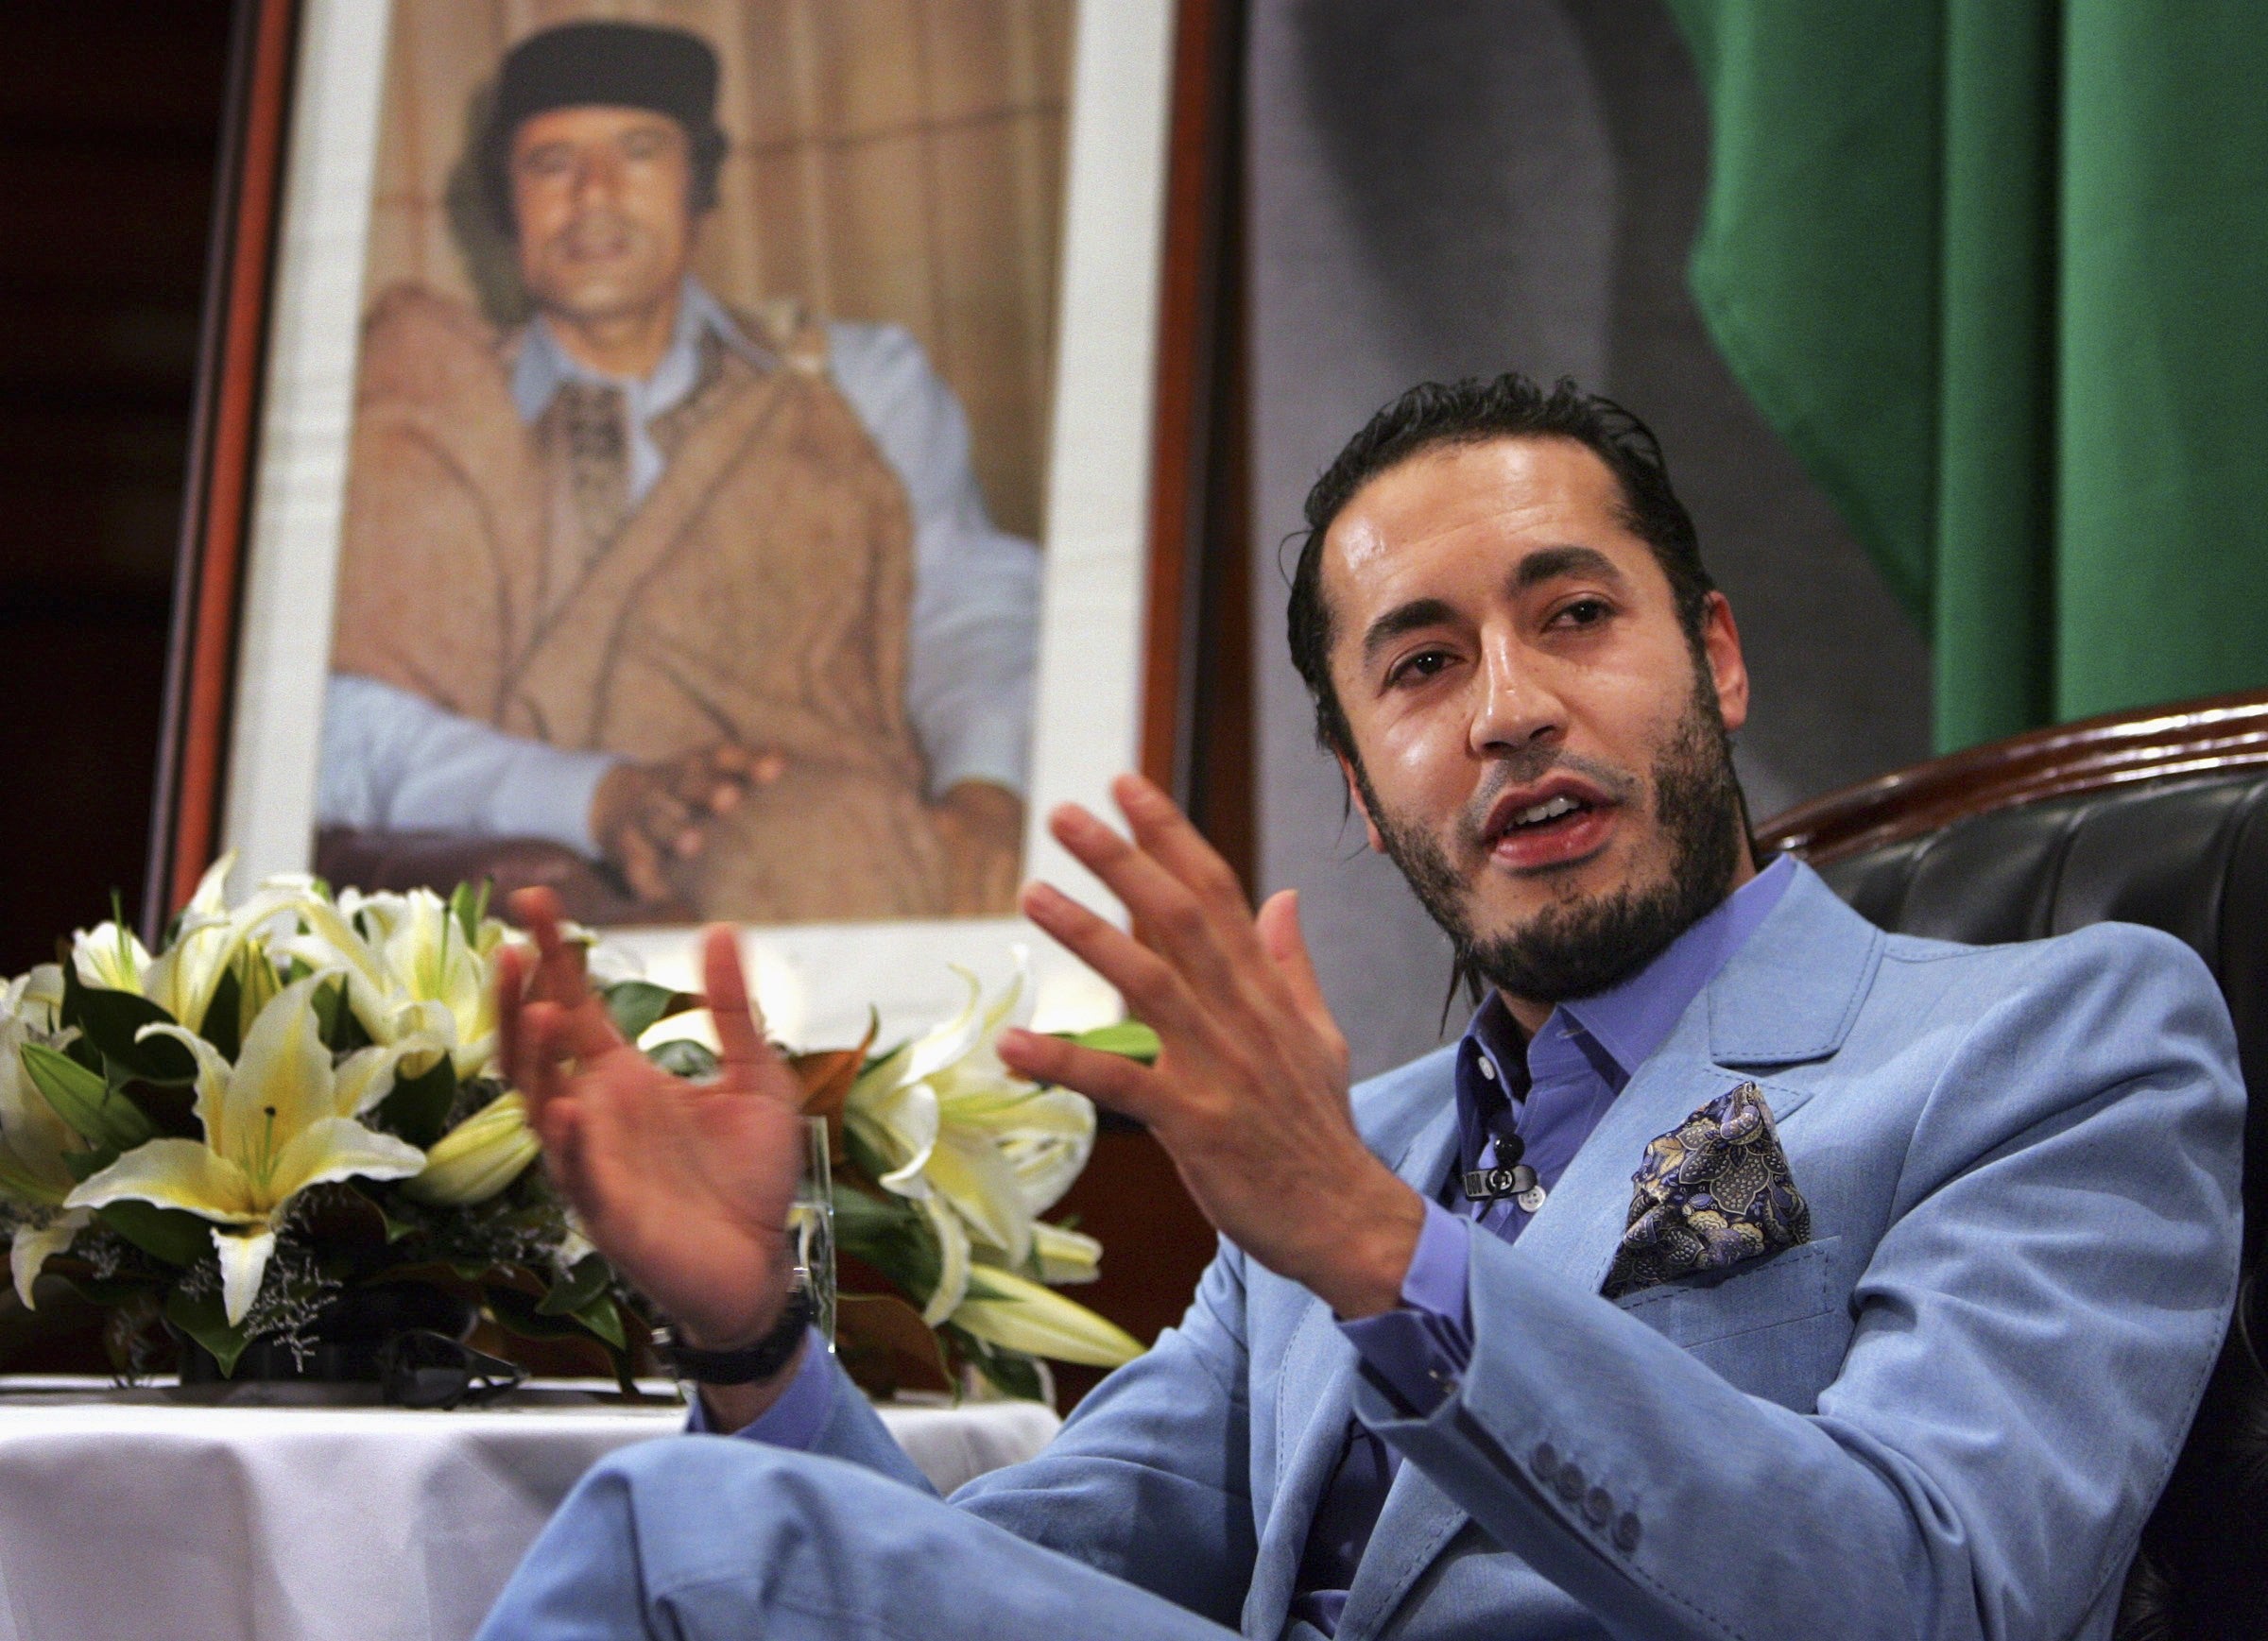 Al Saadi Gaddafi, the third son of Libyan leader Muammar Gaddafi (portrait on left), speaks at a news conference in Sydney in this February 7, 2005 file photo. Niger has extradited Muammar Gaddafi's son Saadi, who just arrived inTripoli and was brought to a prison, the Libyan government said on March 6, 2014. The North African country had been seeking the extradition of Saadi, who had fled to the southern neighbour nation after the toppling of Gaddafi in a NATO-backed uprising in 2011.